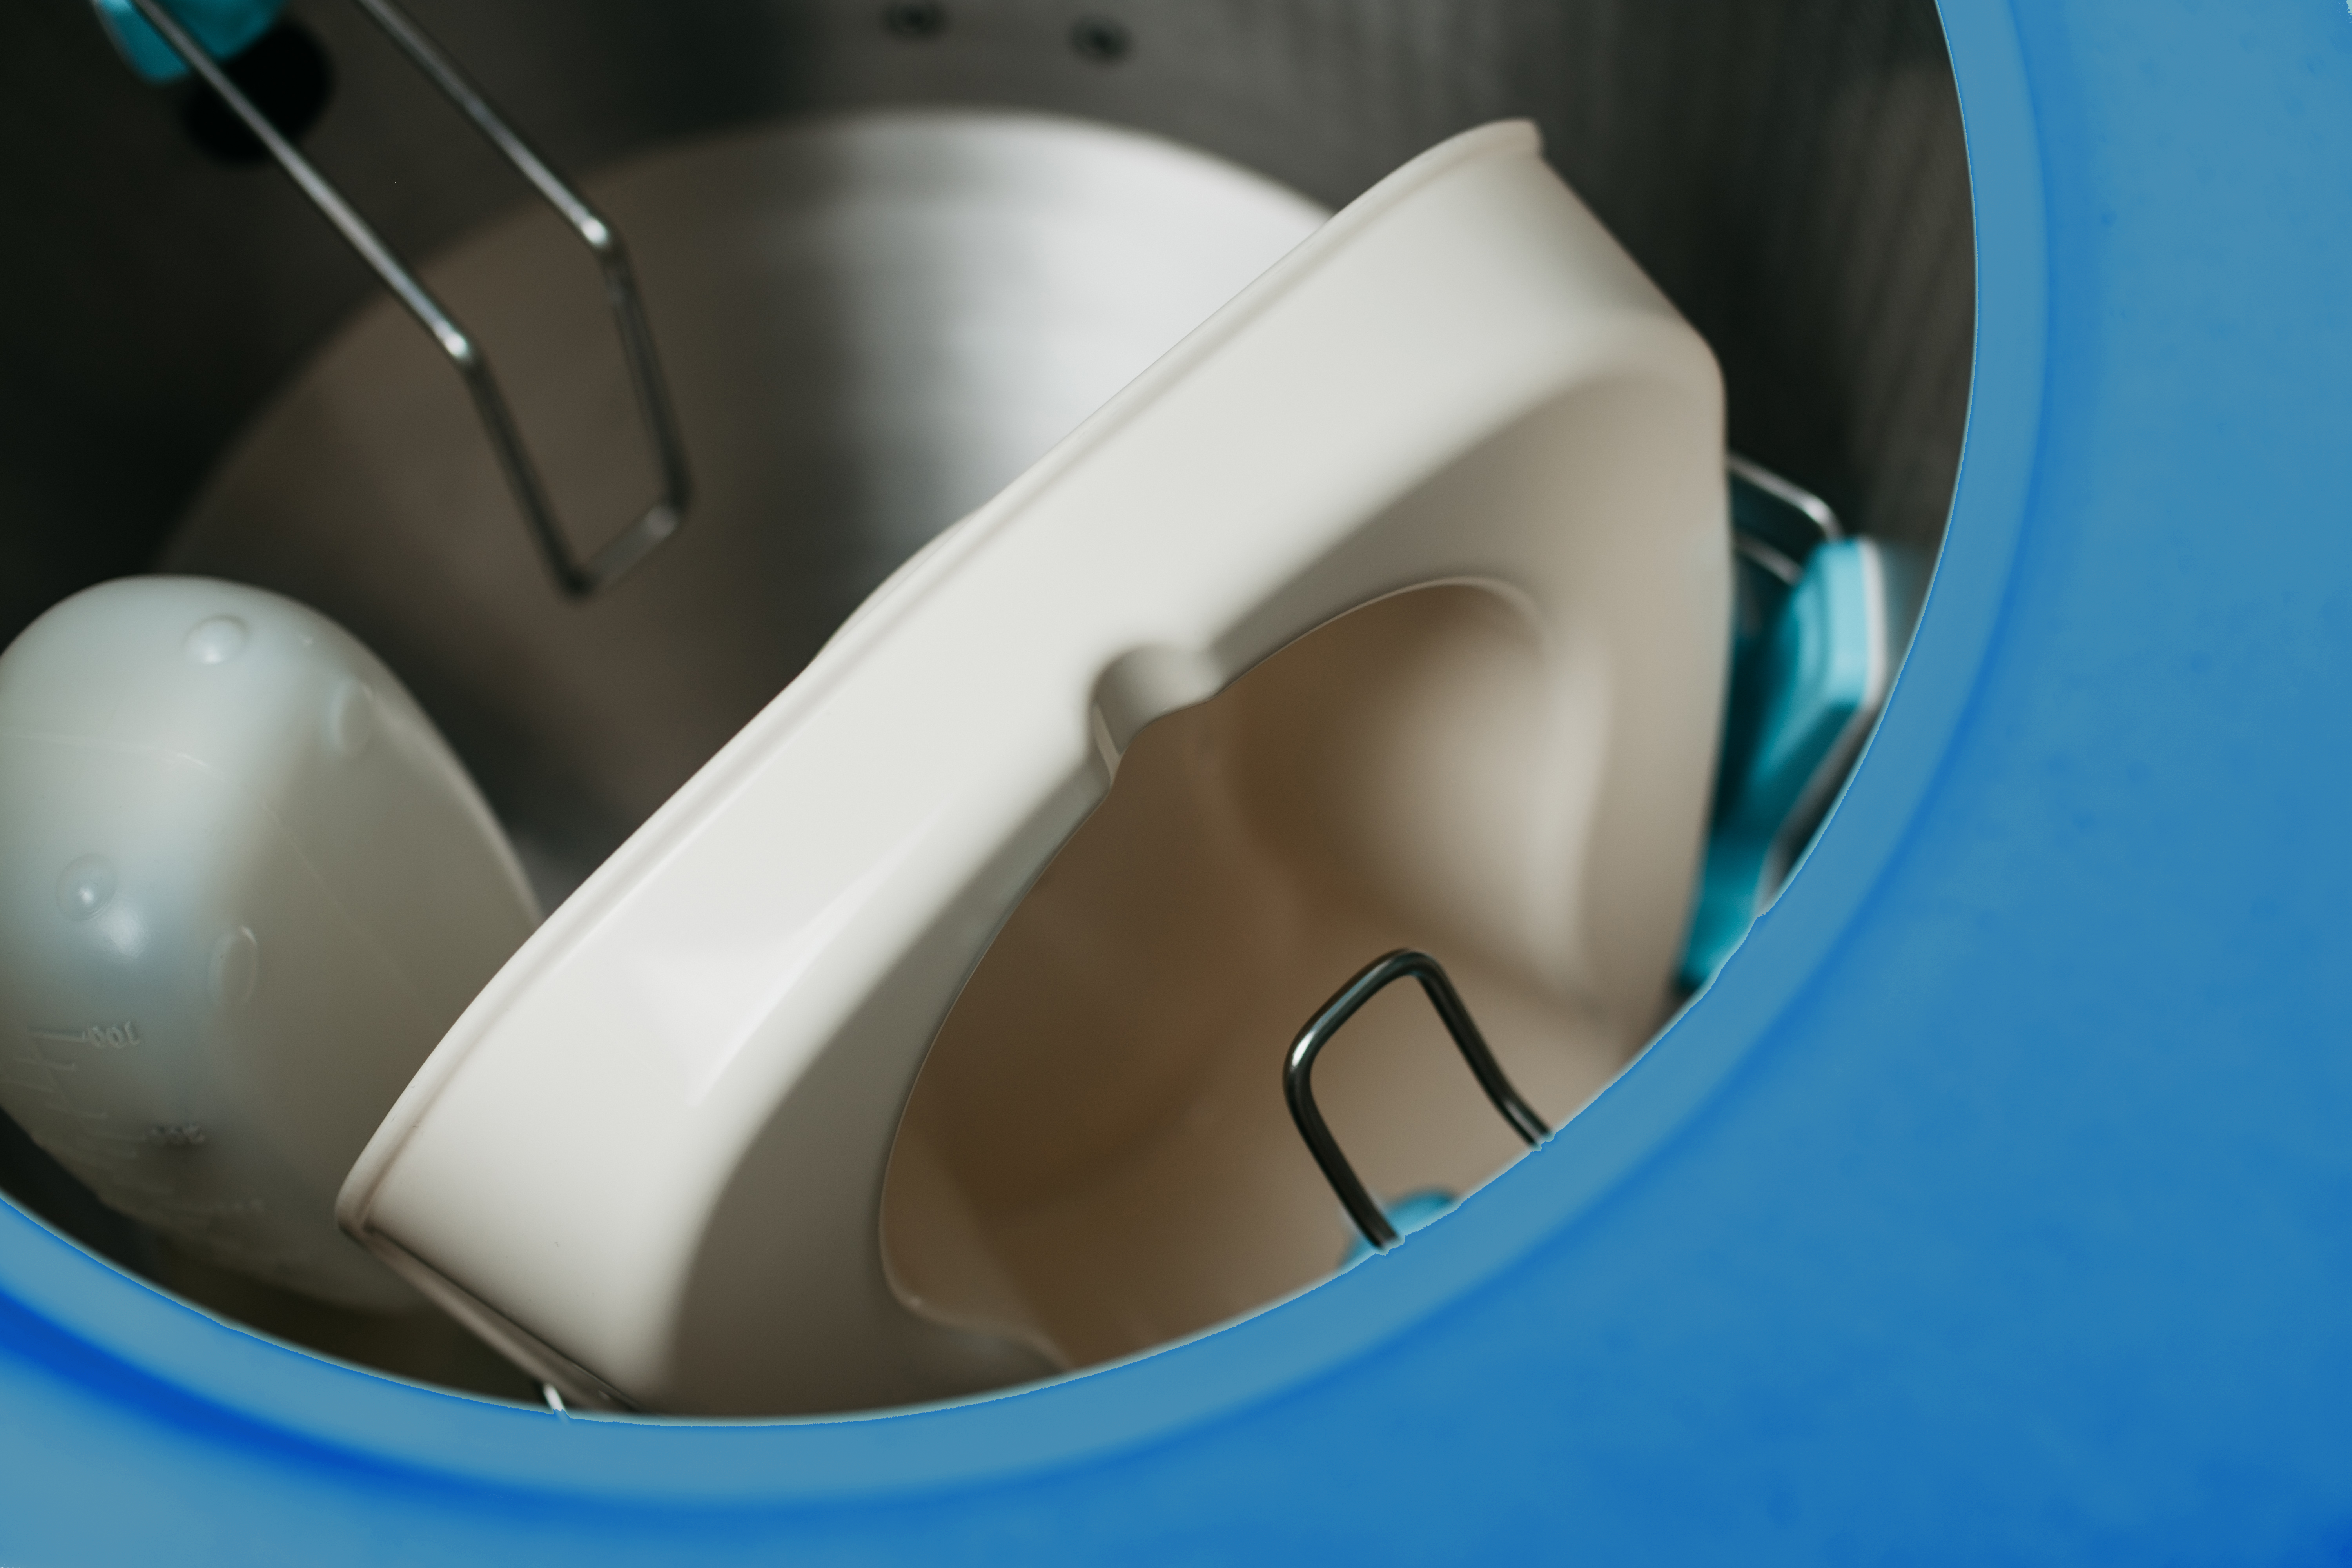 DDC Dolphin Panamatic Mini Bedpan Washer Disinfector Lid Closed